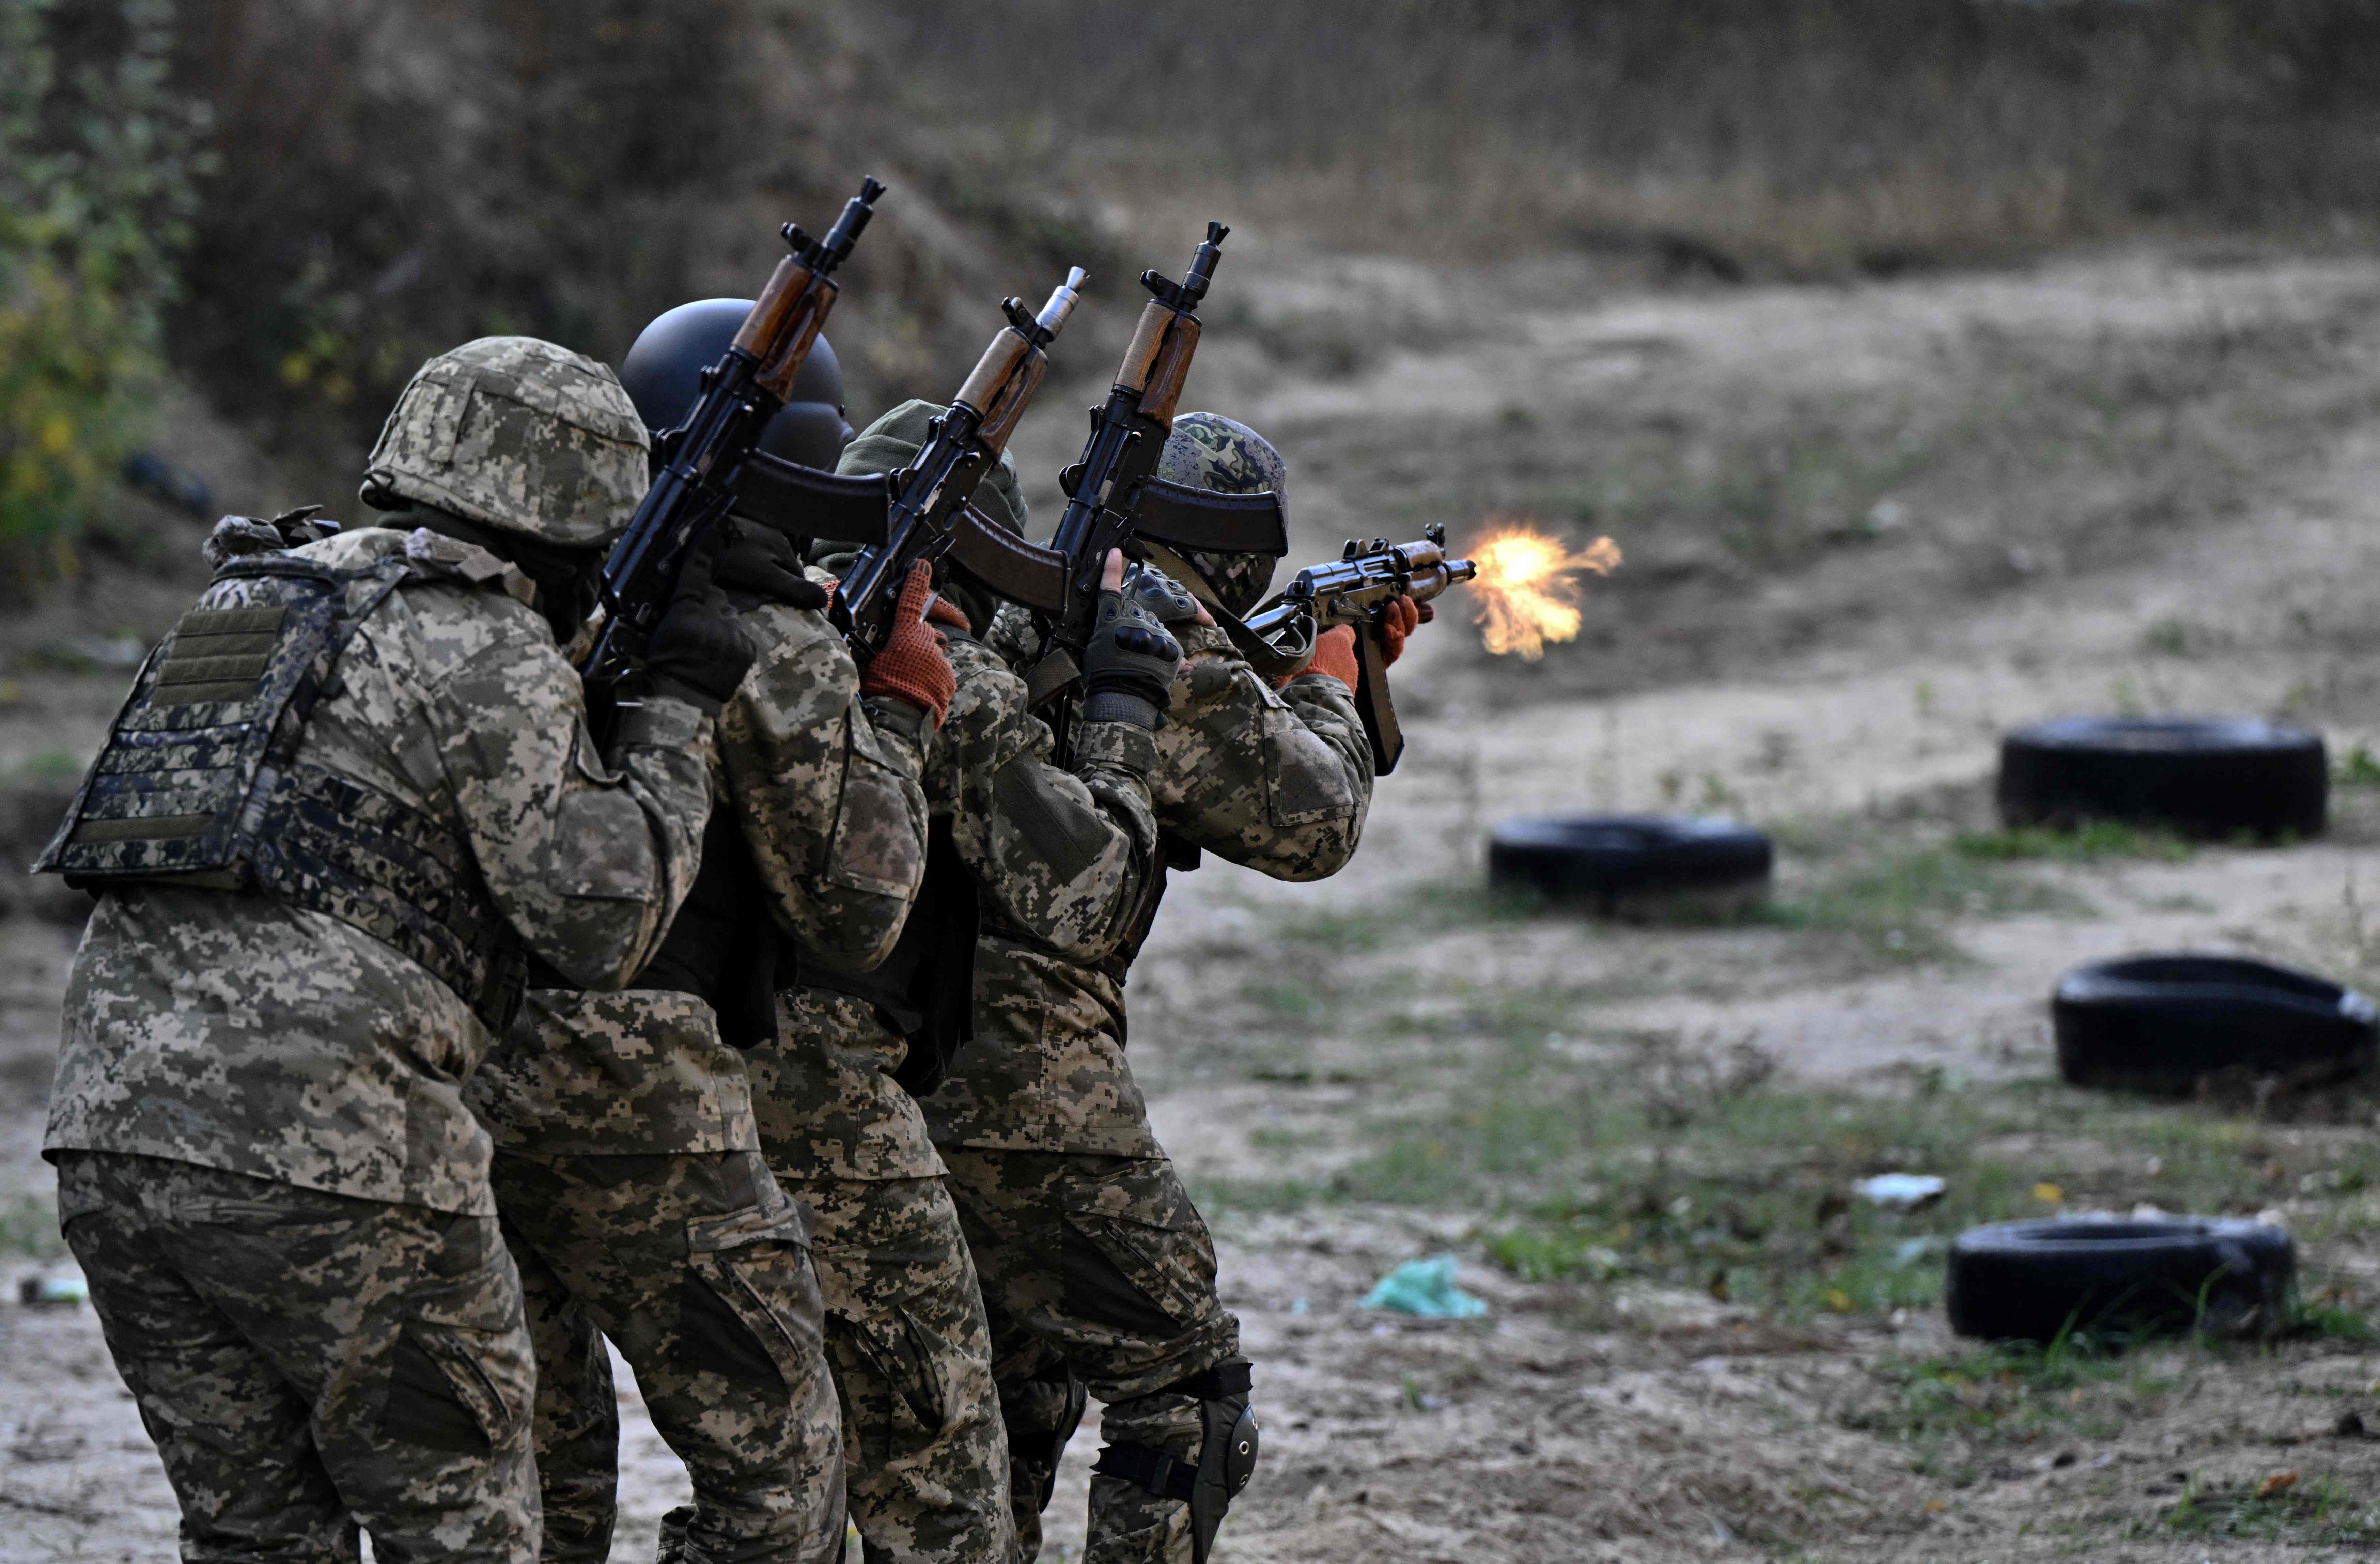 The newly formed Siberian Battalion training with Ukrainian forces close to the frontline